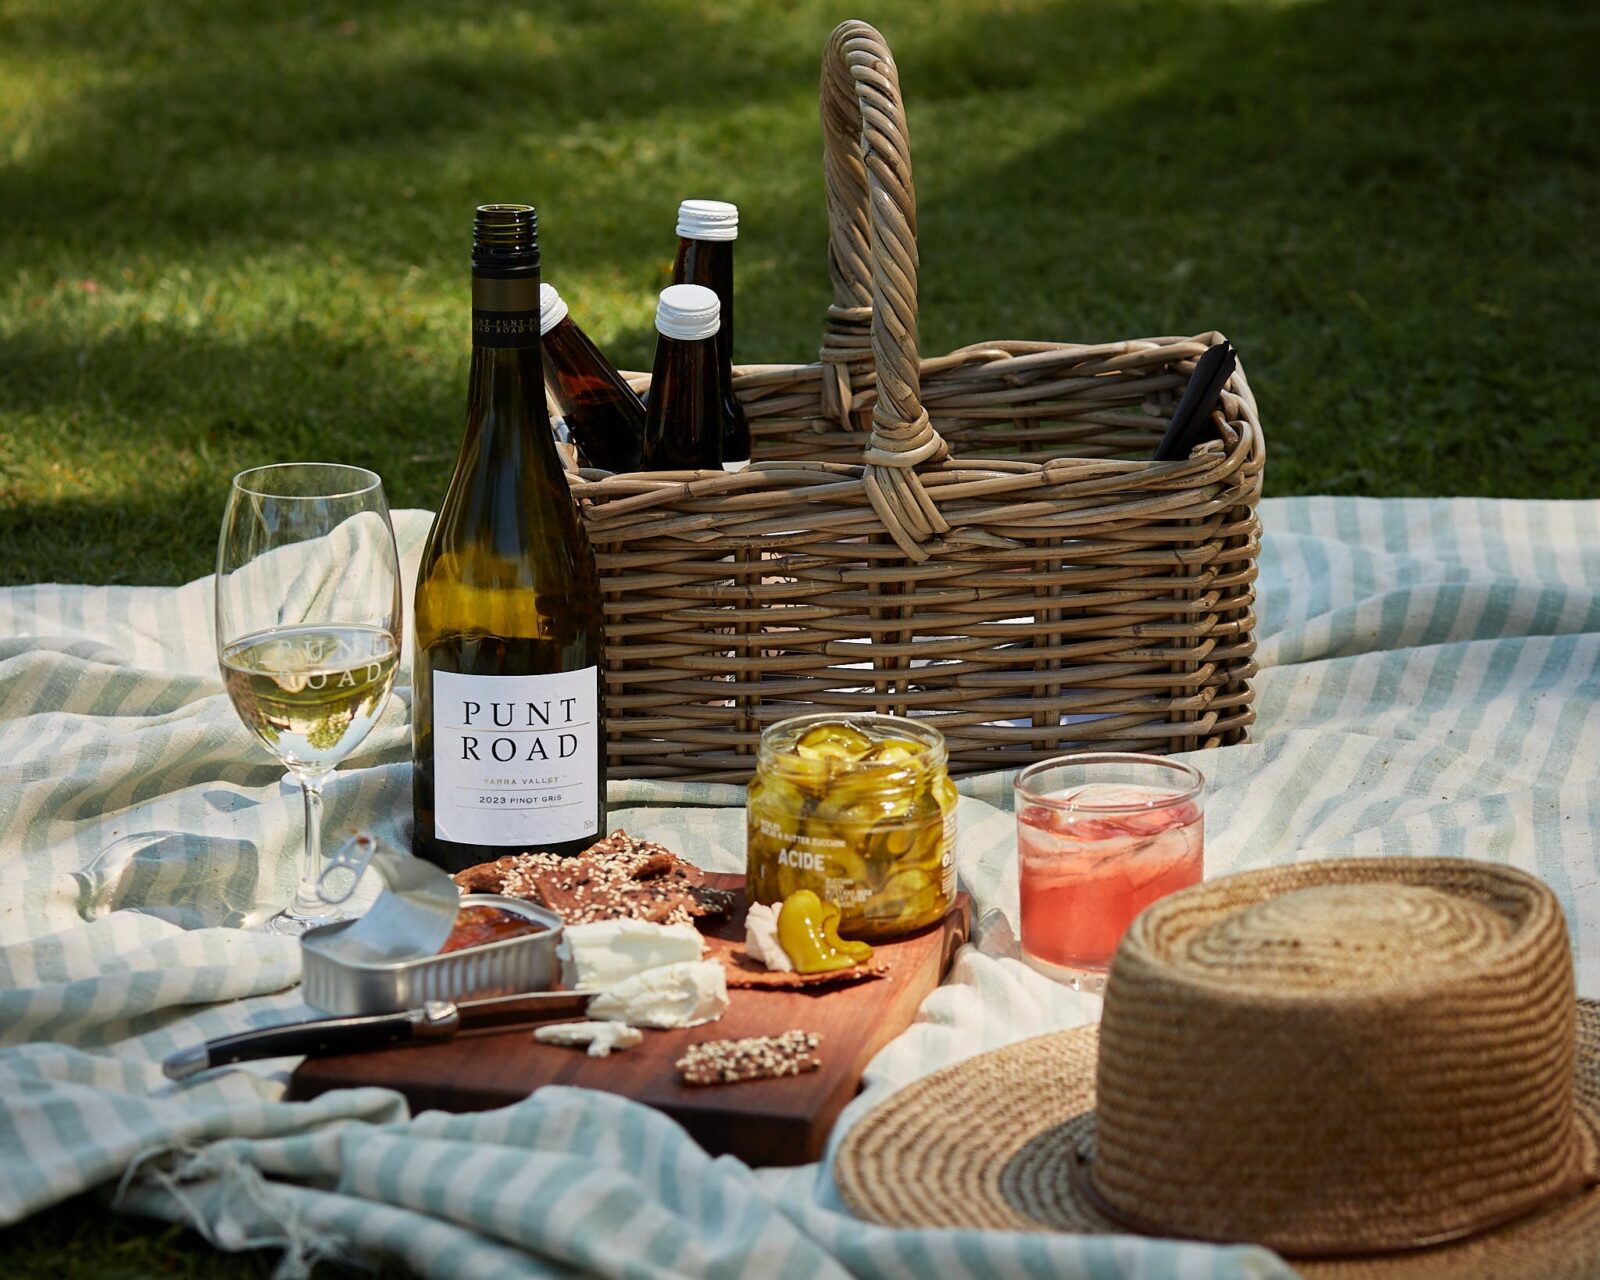 A blanket is laid out with a picnic and wine